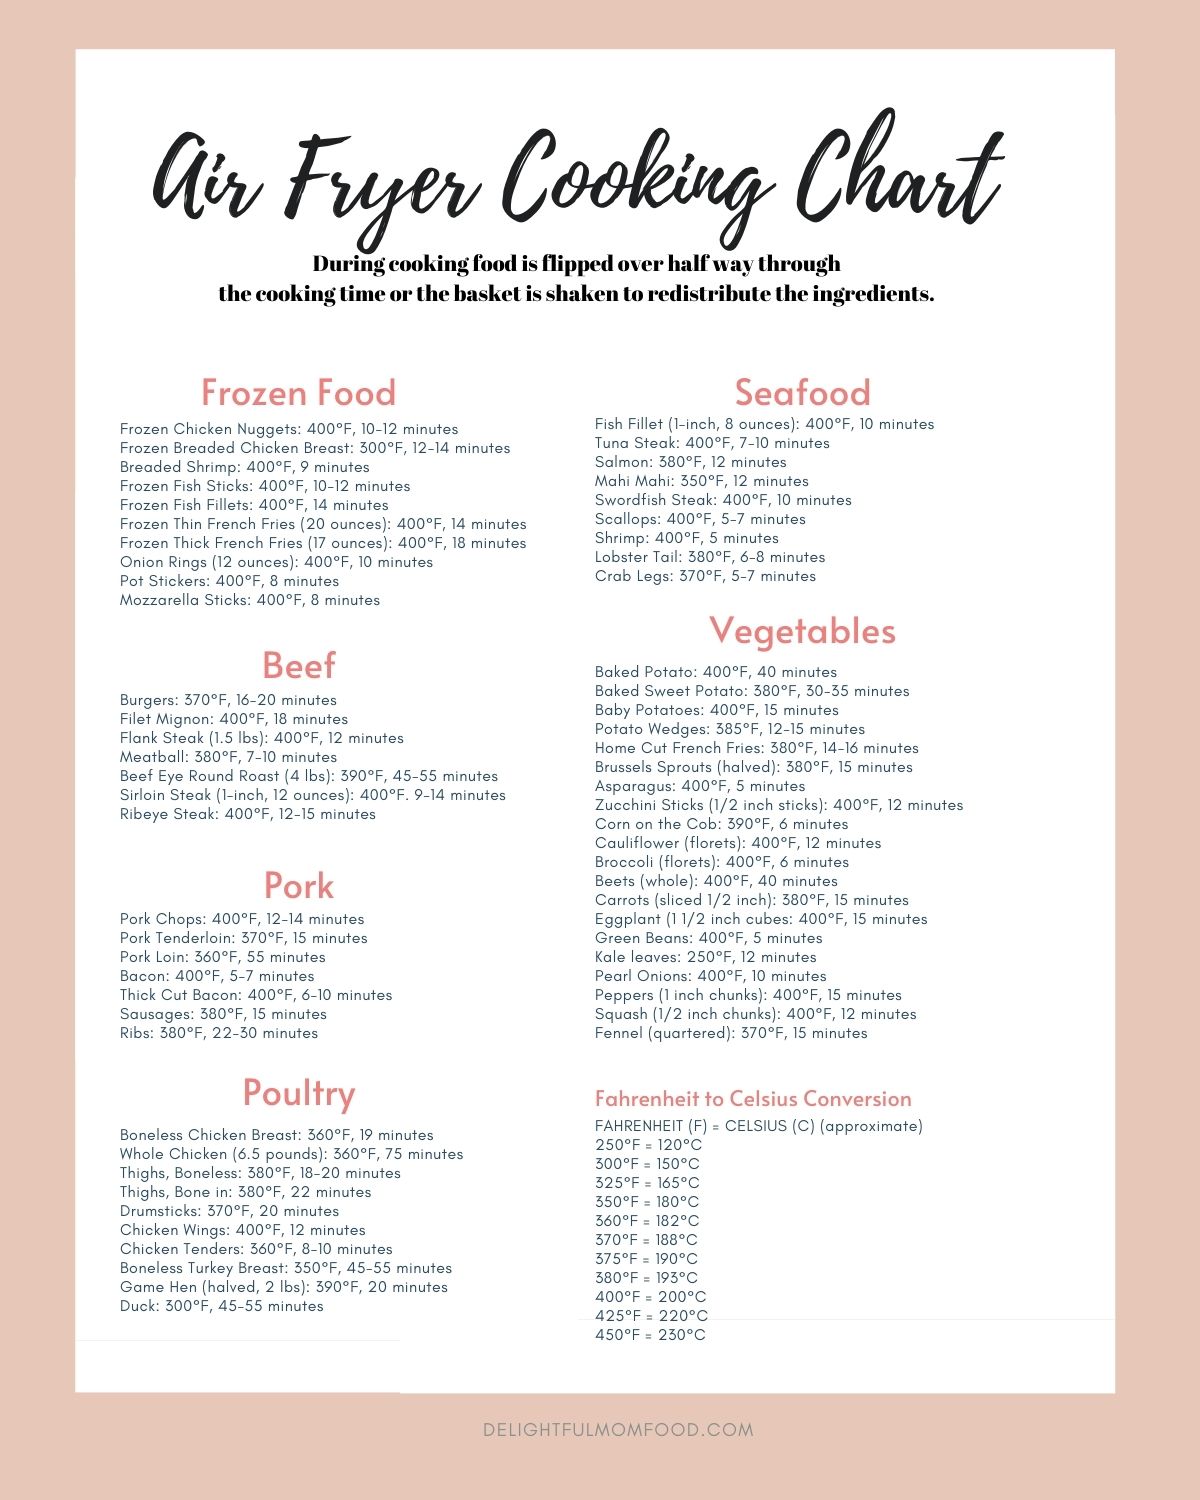 Air Fryer Cooking Chart - Delightful Mom Food